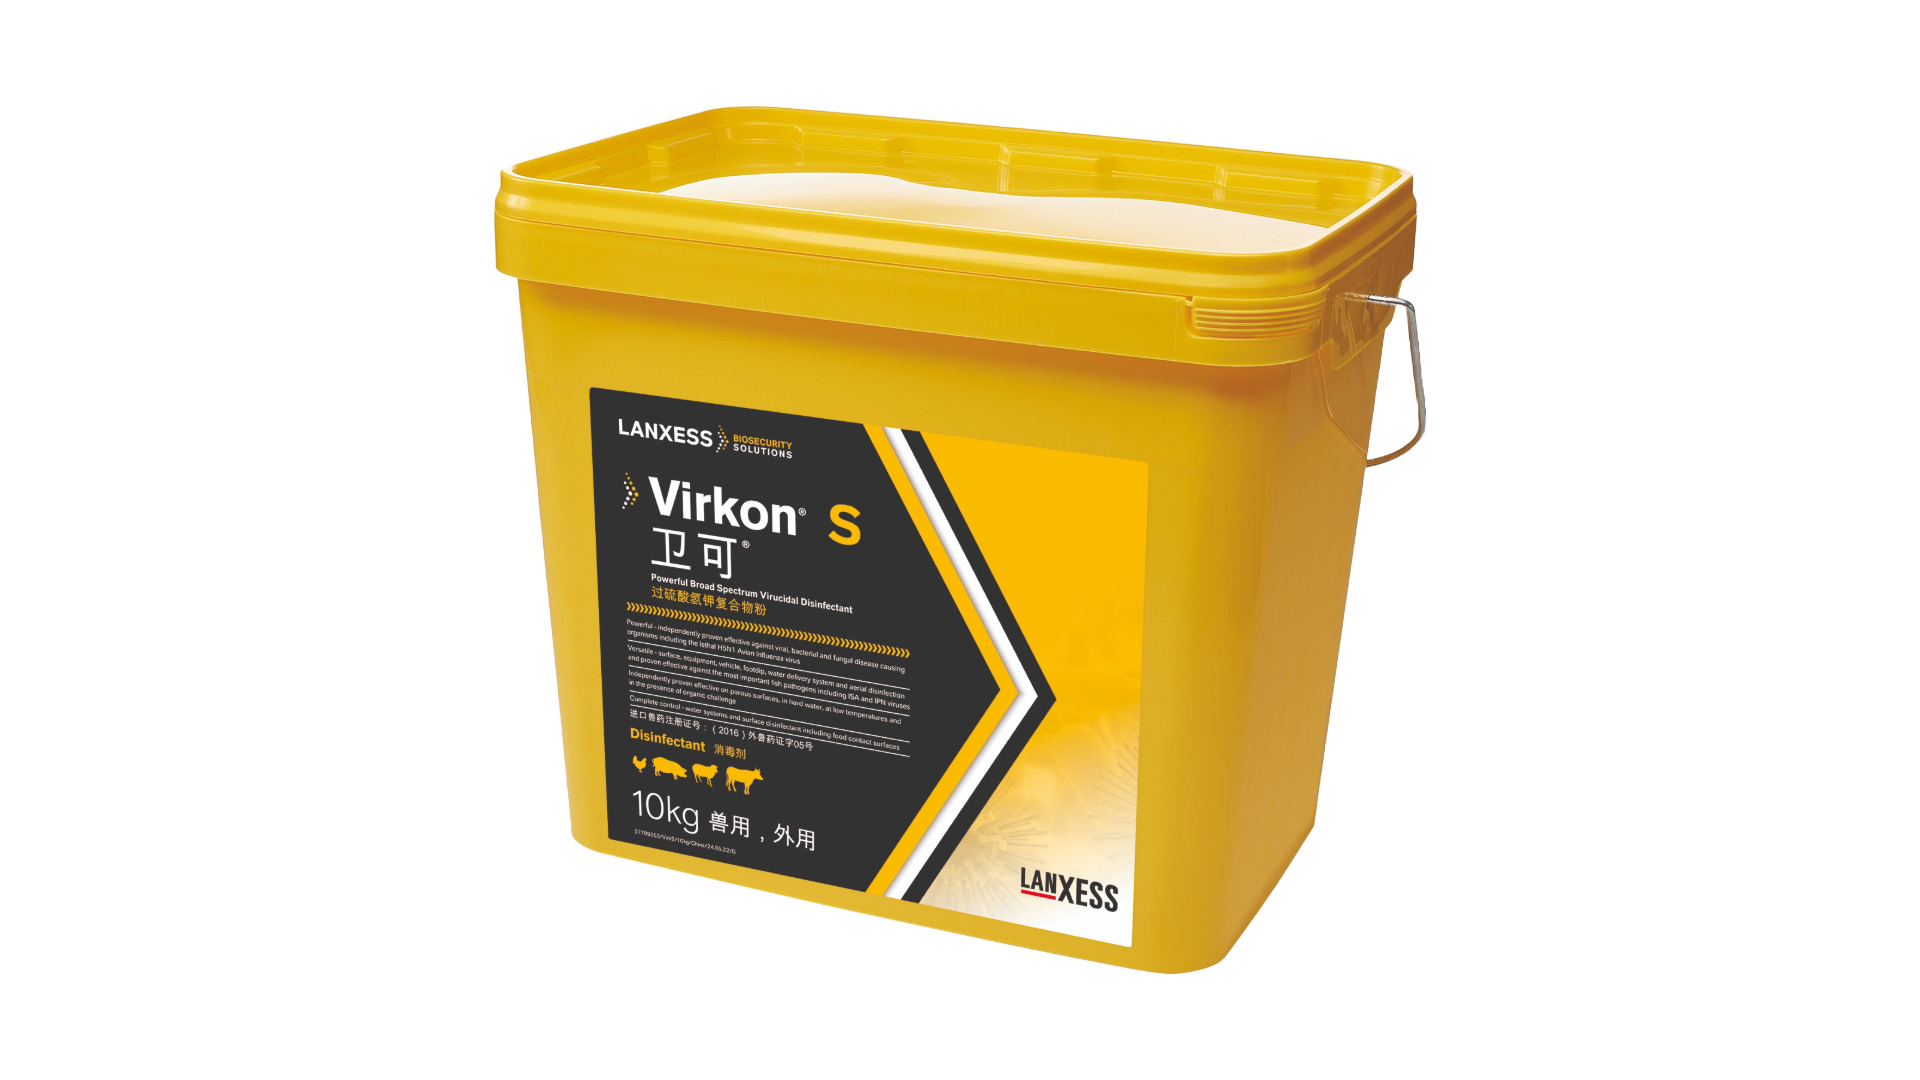 Virkon S in the Chinese product box